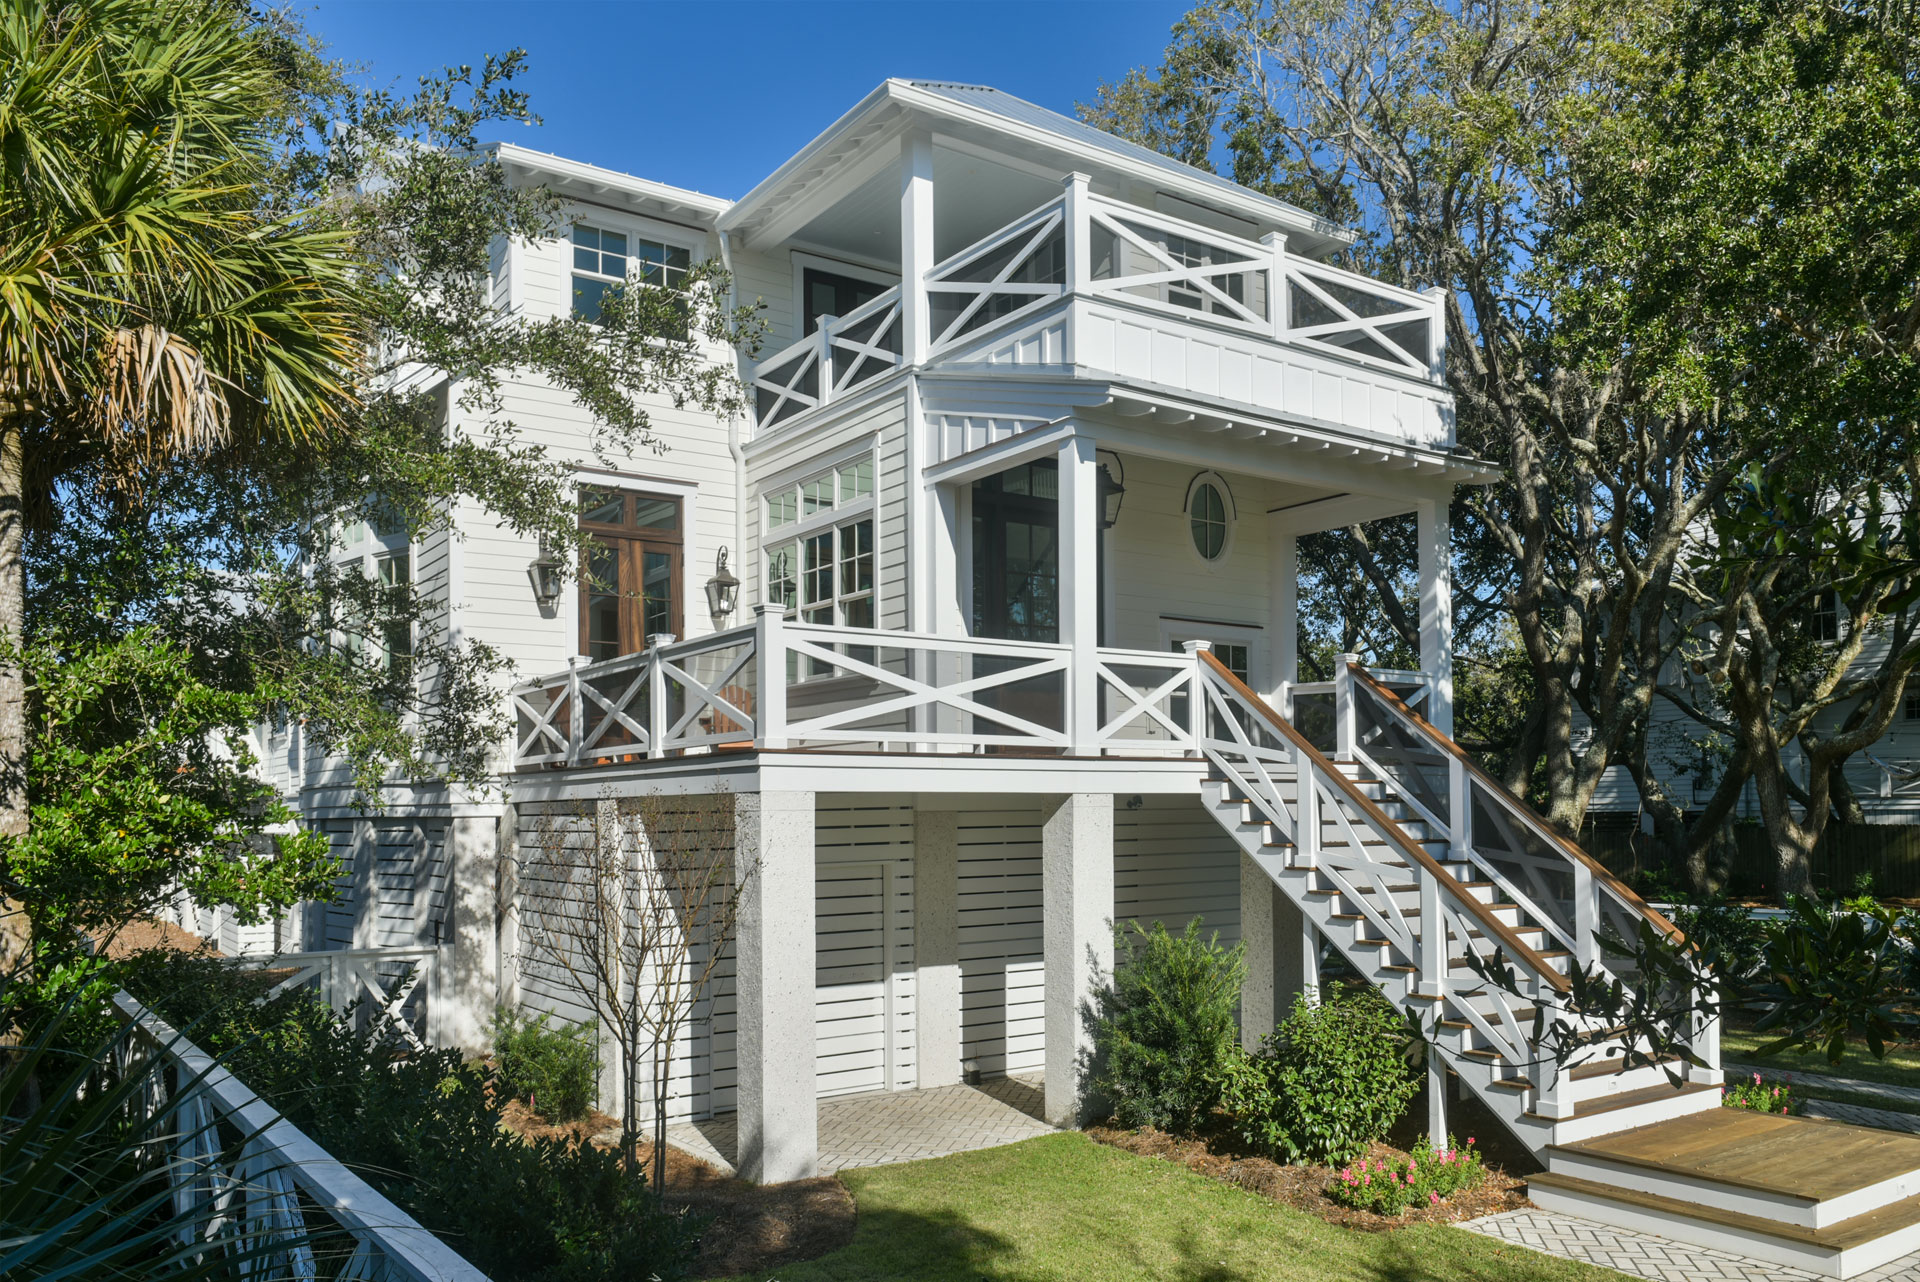 Newly-built coastal, low country home with elevated front porch and balacony/deck above